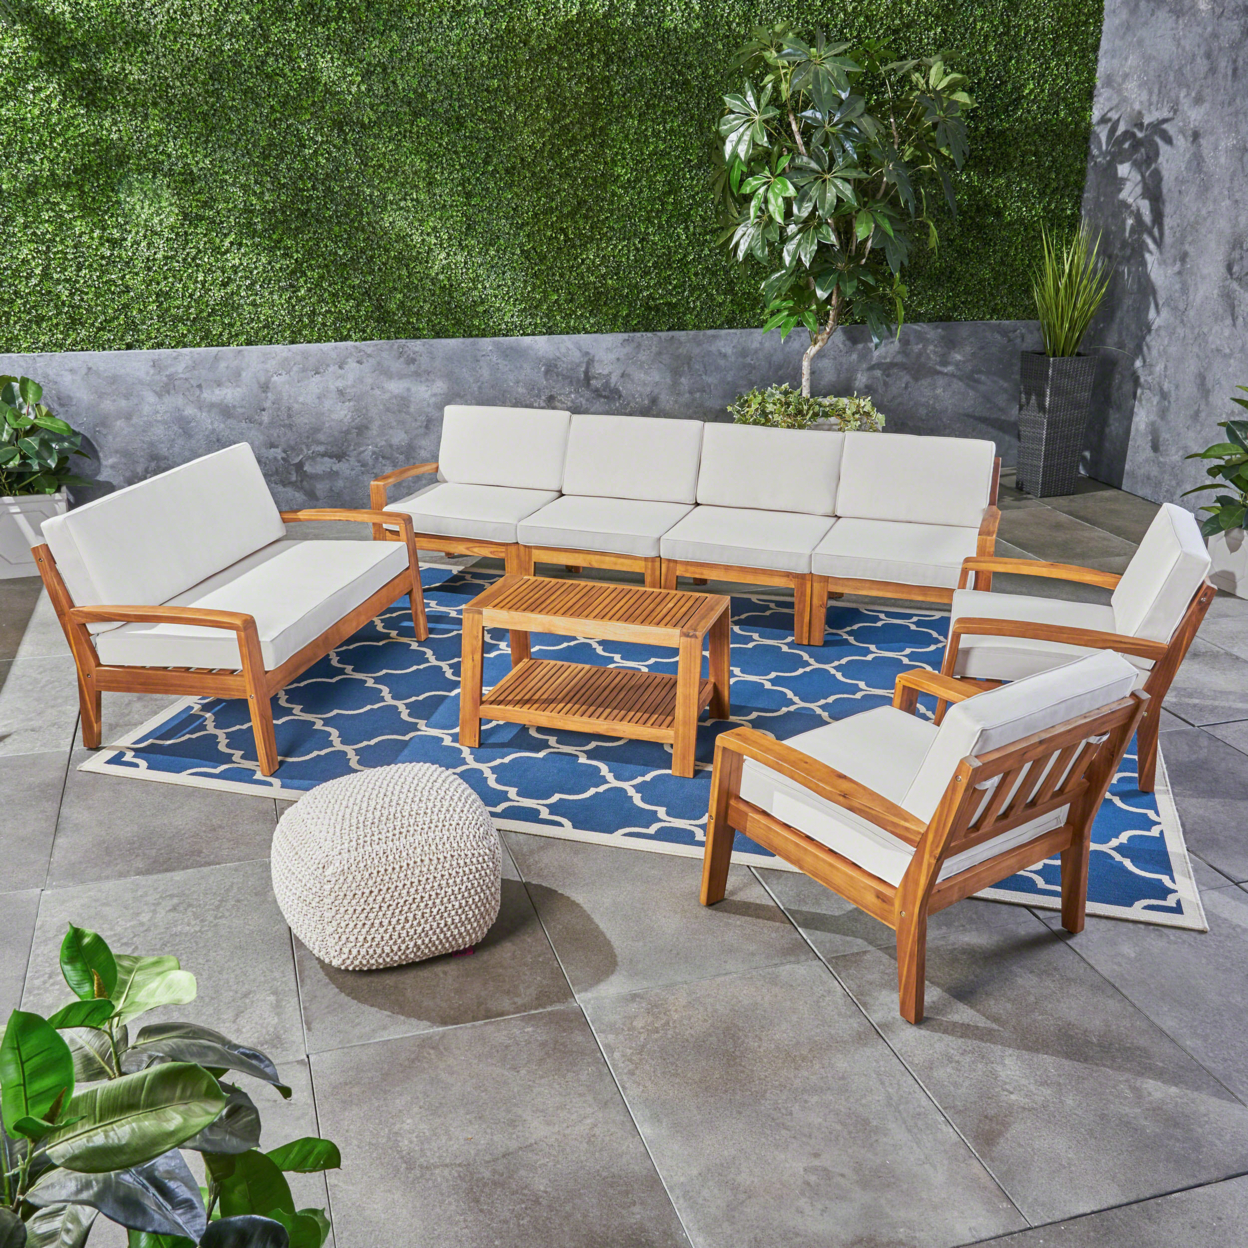 Amaryllis Outdoor Acacia Wood 8 Seater Sectional Chat Set With Coffee Table - Teak / Blue